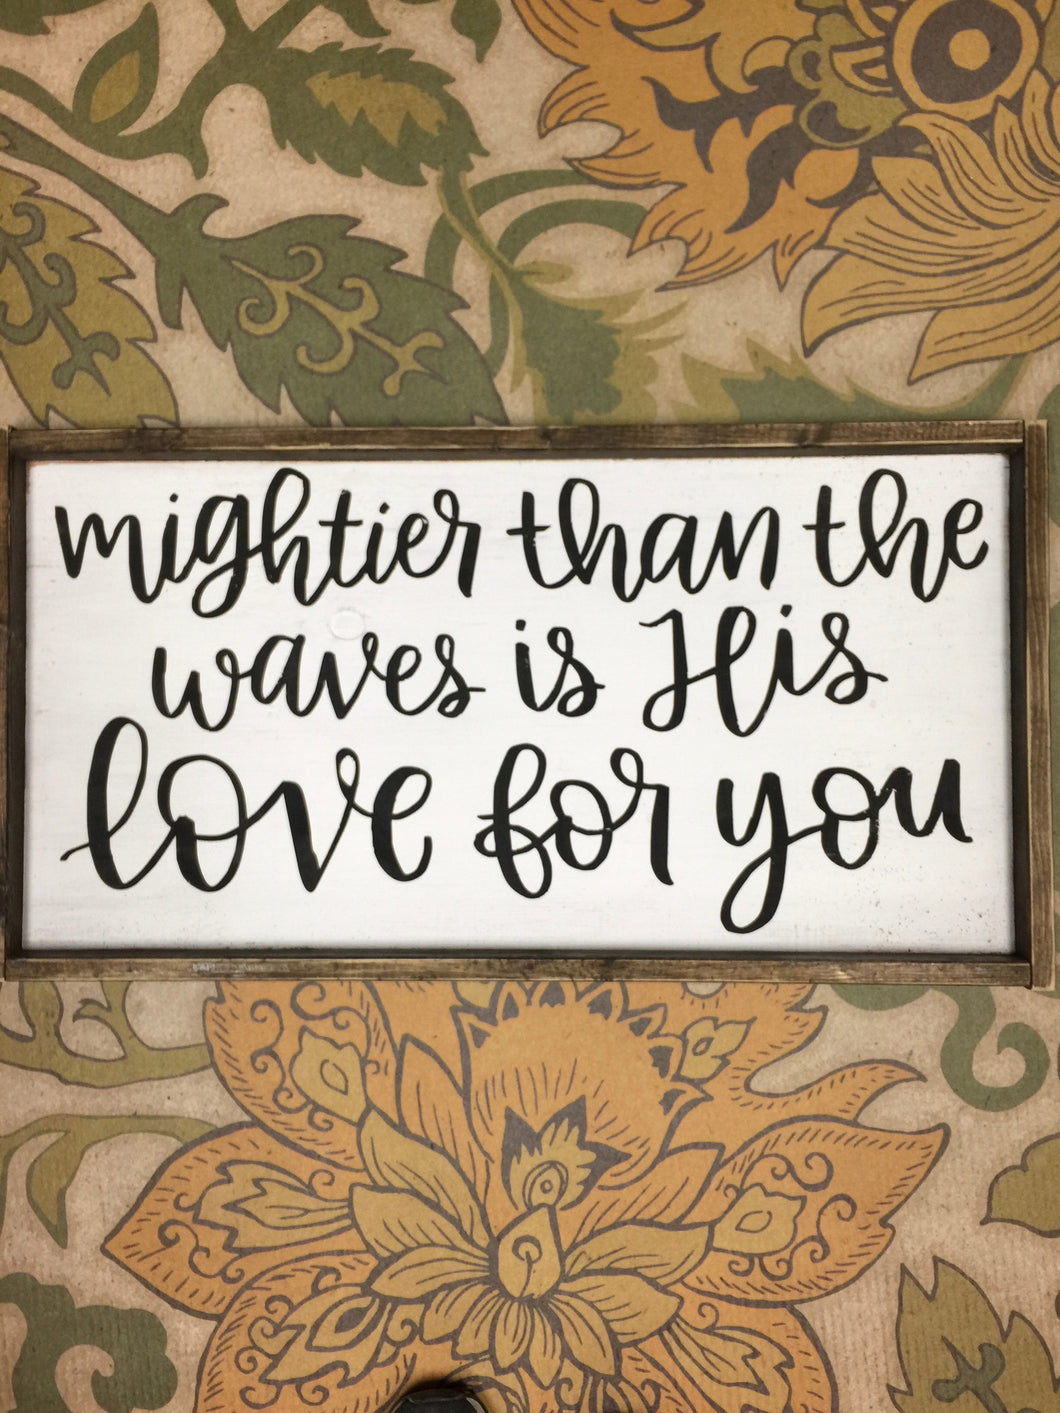 Mightier Than The Waves Is His Love For You